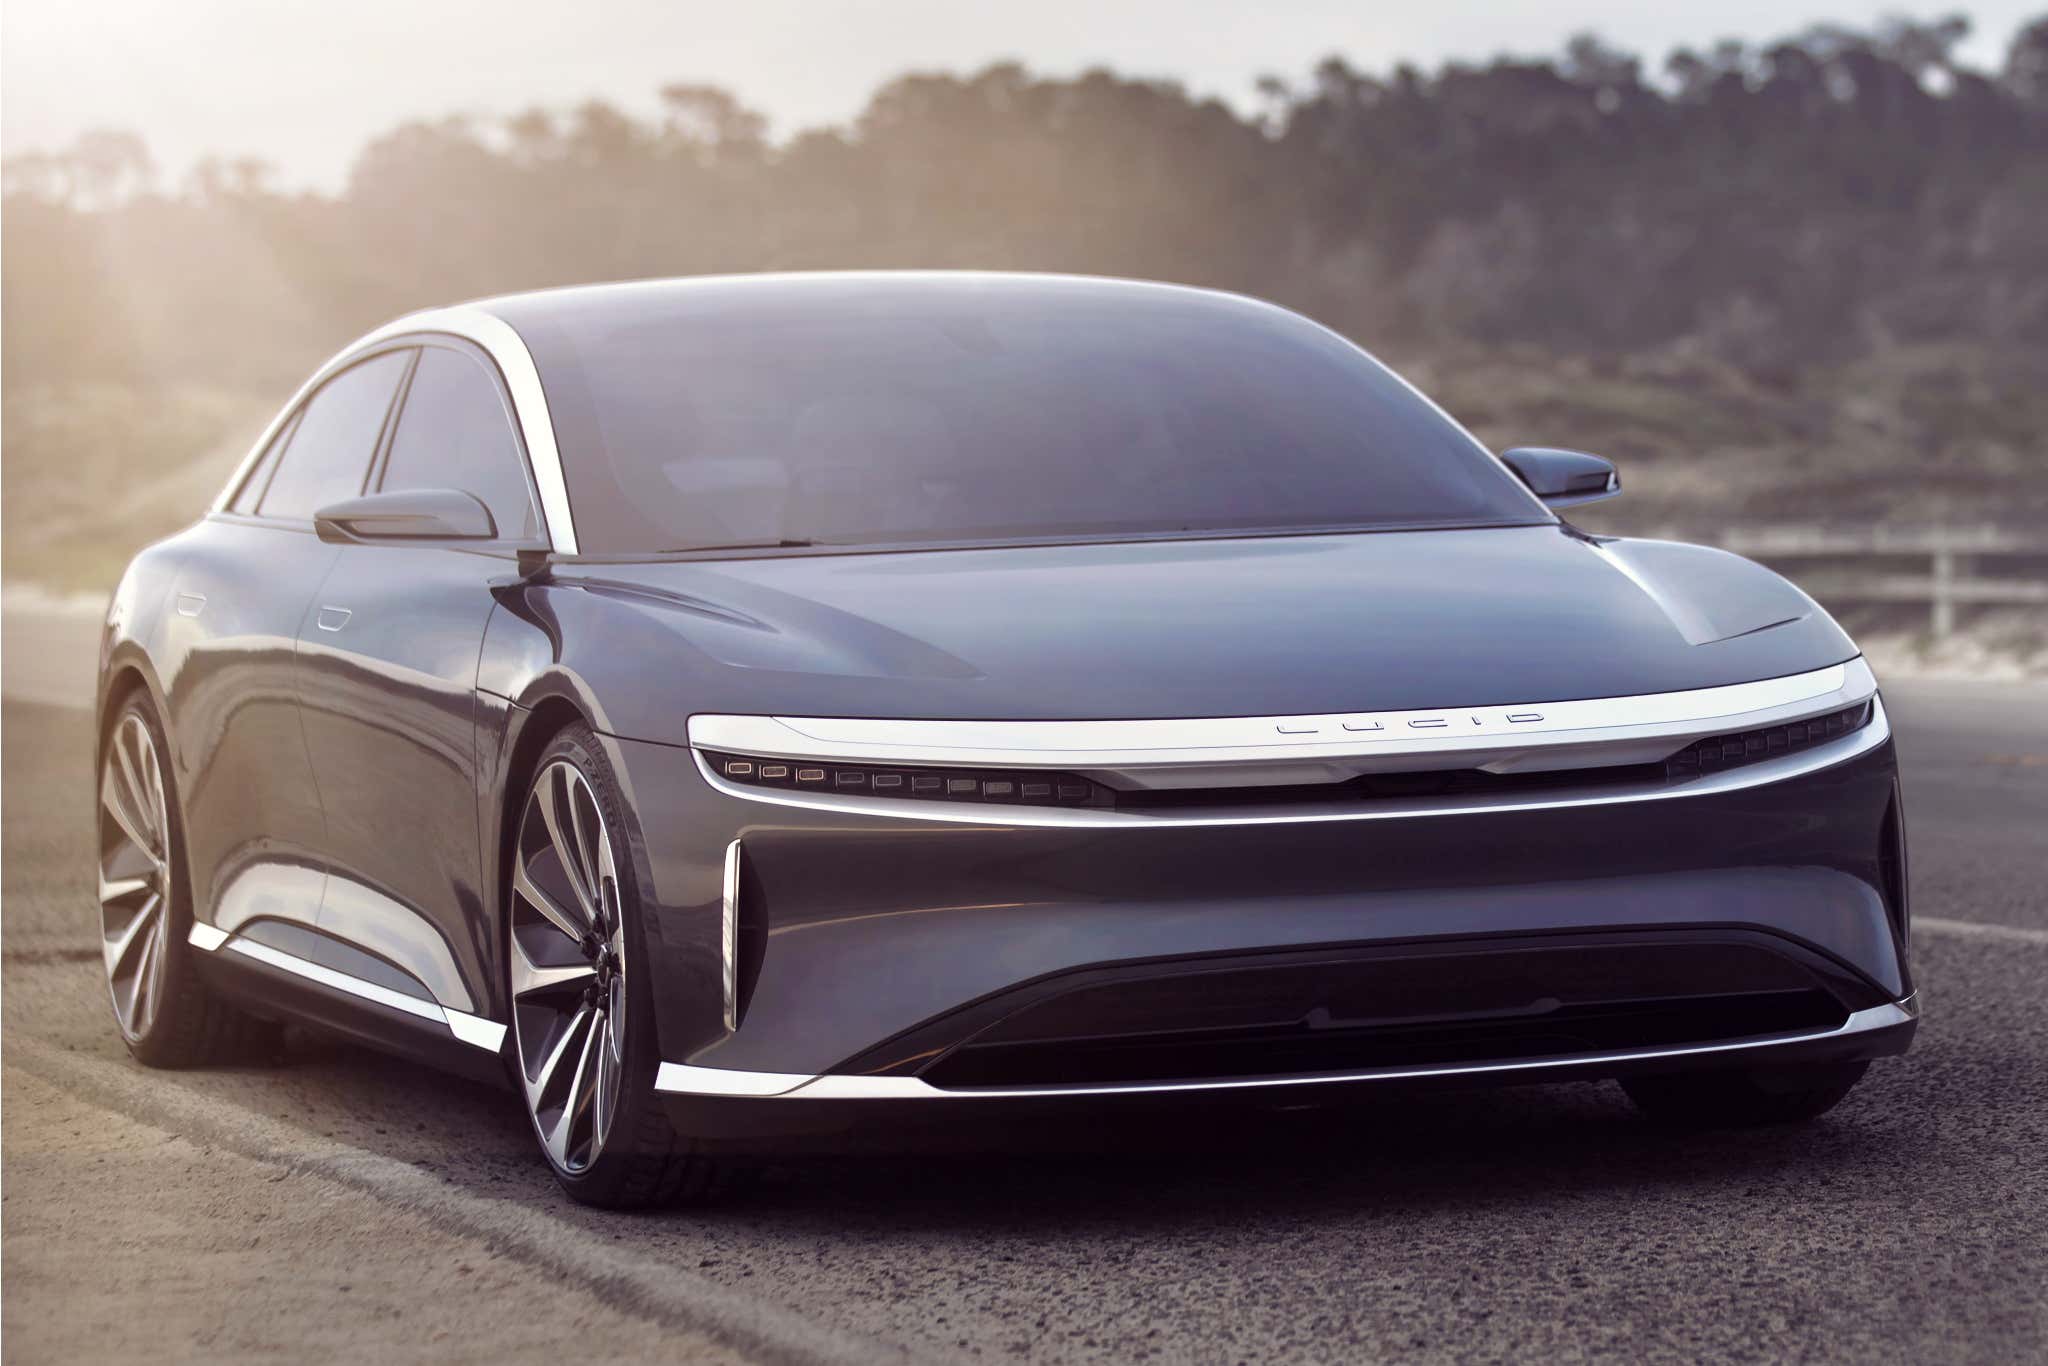 2021 Lucid Air EV Launches With 517-Mile Range, $169,000 Price Tag